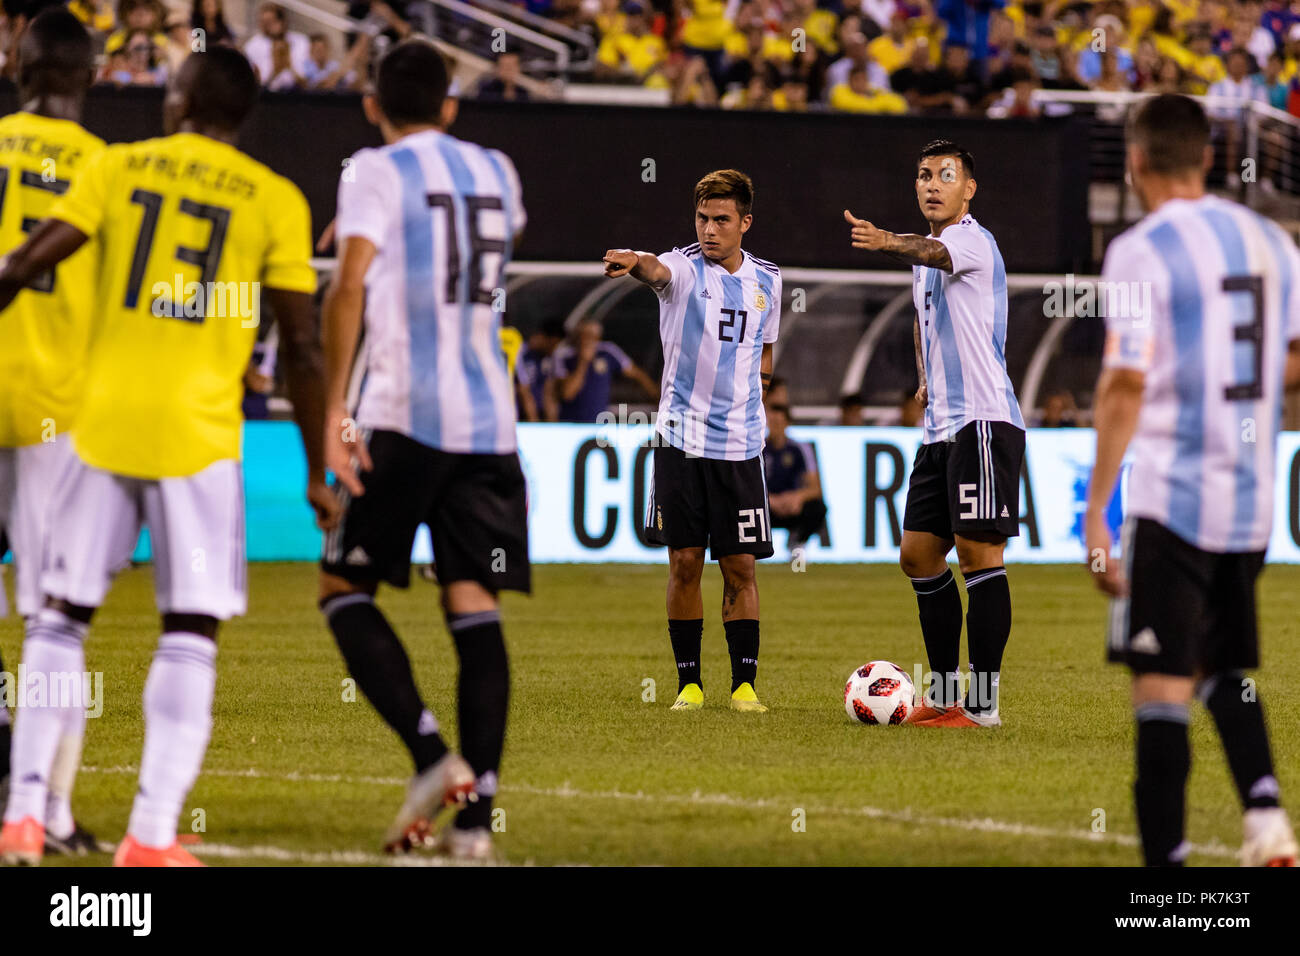 East Rutherford, NJ, USA. 11th Sept, 2018. Paulo Dybala (21) and Leandro Paredes (5) direct traffic ahead of a free kick just outside the box. © Ben Nichols/Alamy Live News. Stock Photo